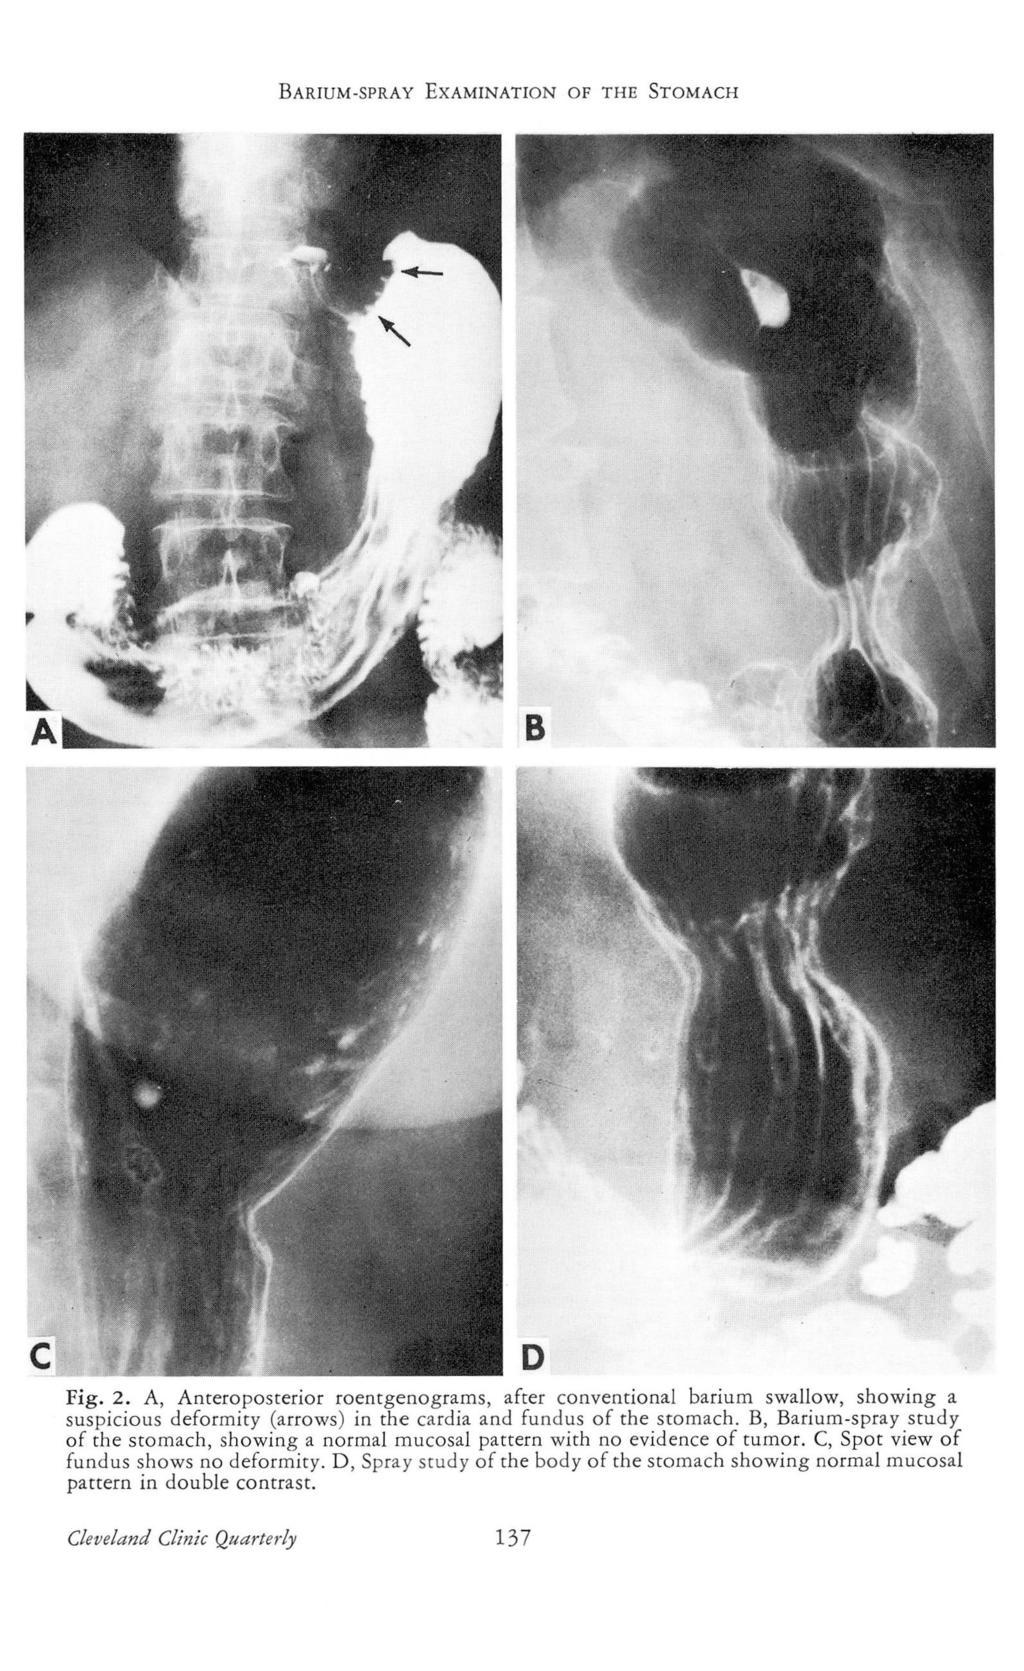 BARIUM-SPRAY EXAMINATION OF THE STOMACH Fig. 2. A, Anteroposterior roentgenograms, after conventional barium swallow, showing a suspicious deformity (arrows) in the cardia and fundus of the stomach.